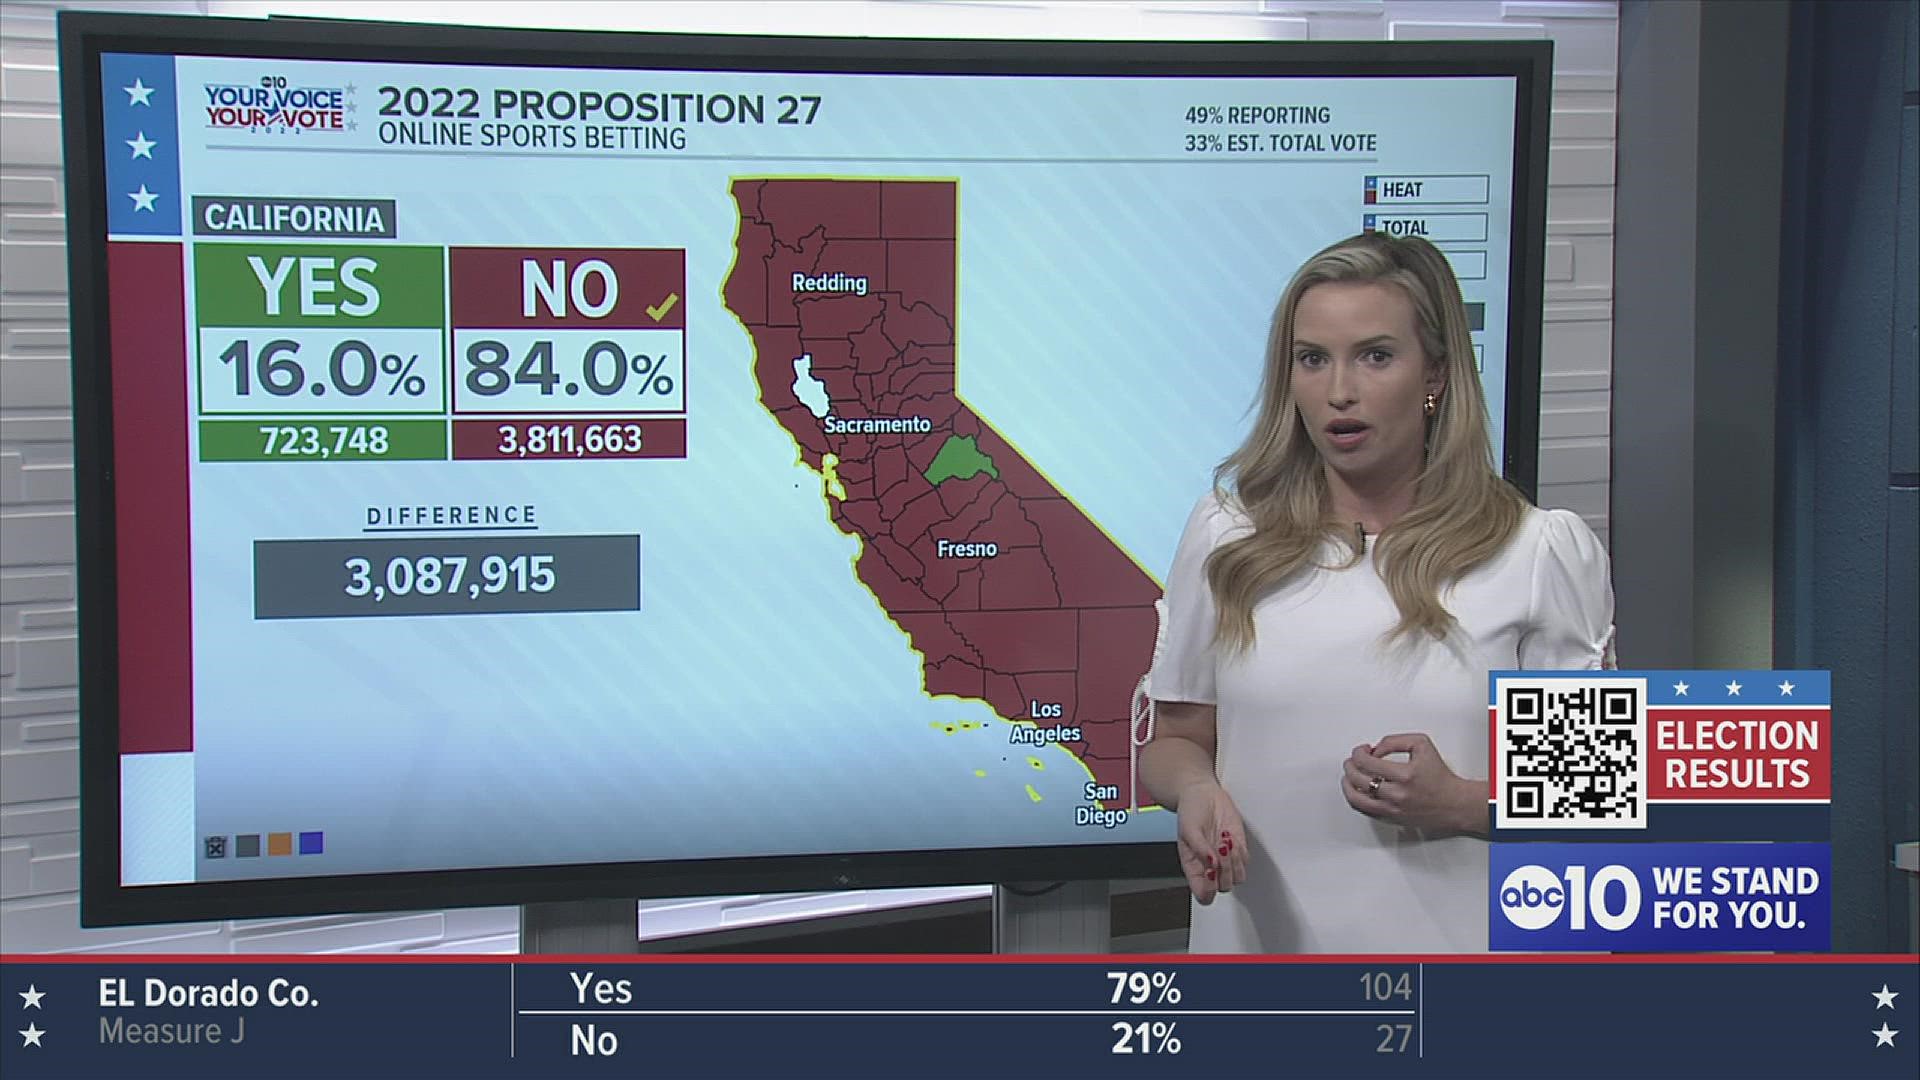 Our Andie Judson shows us the live California 2022 election results as they come in, including the propositions on many issues.